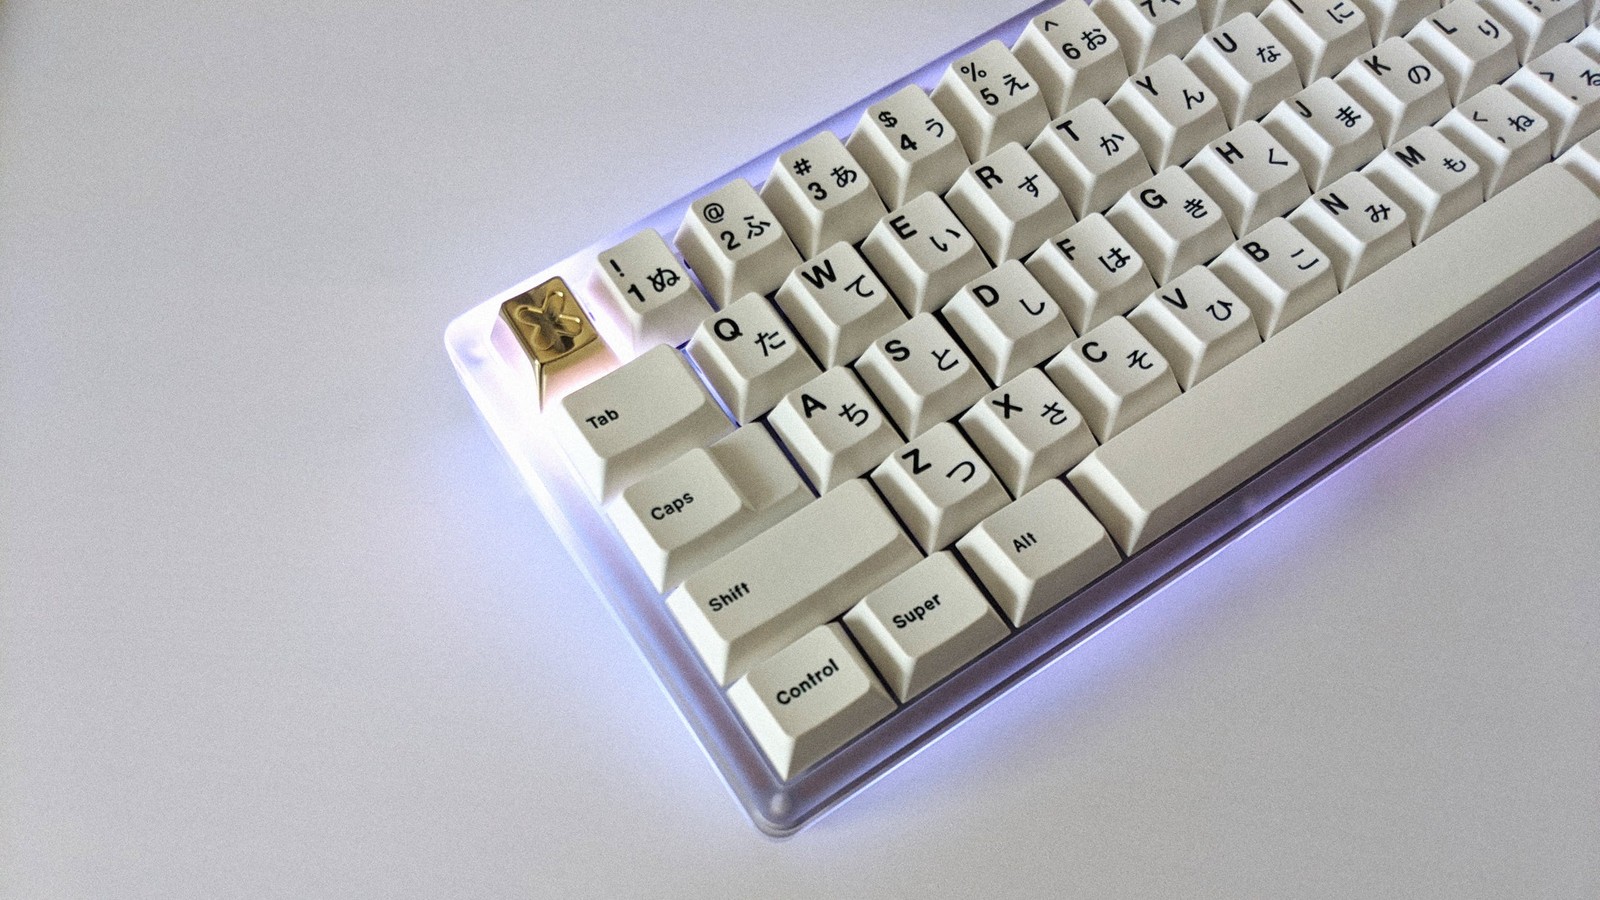 GMK MetaMinimal and RAMA brass keycap on Think 6.5 with white underglow LEDs turned on